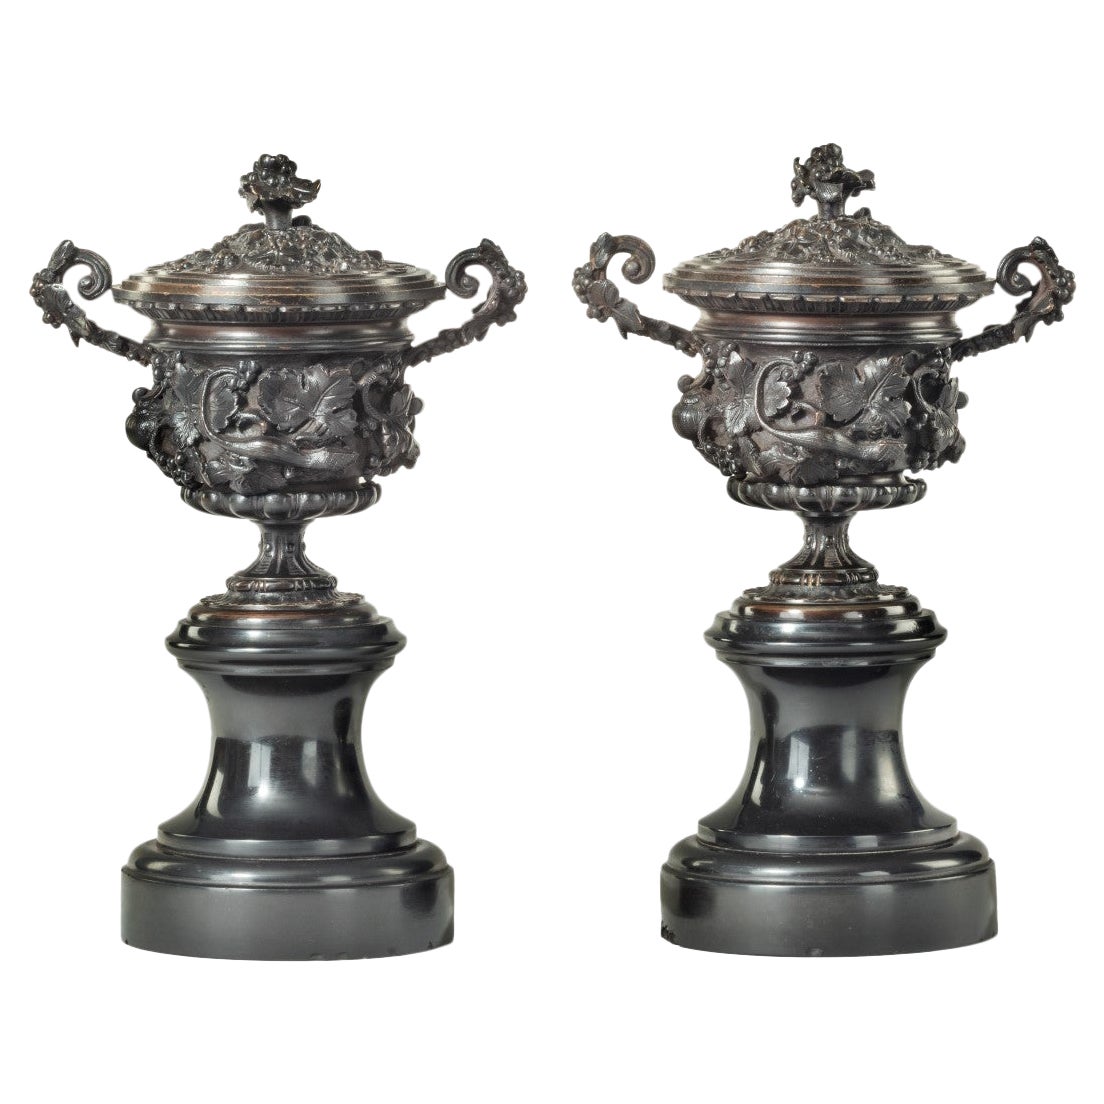 A Fine Pair of Bronze Urns or Vases and Covers c.1870 For Sale